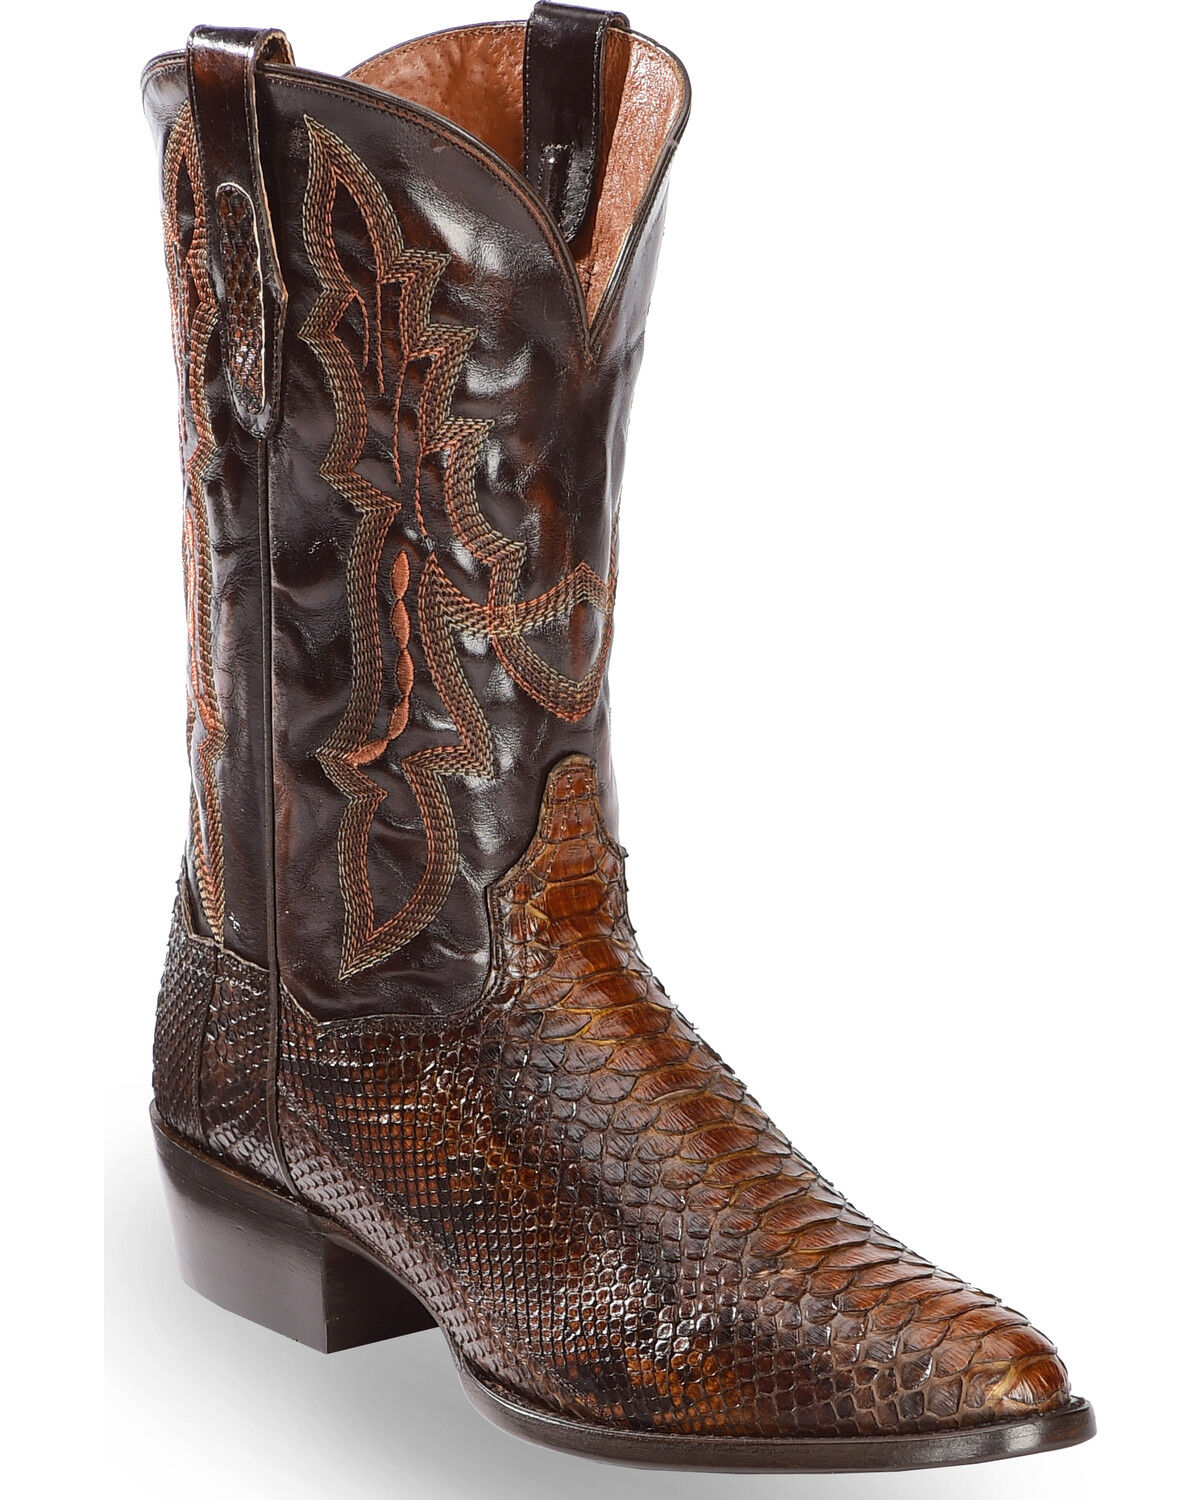 water moccasin boots